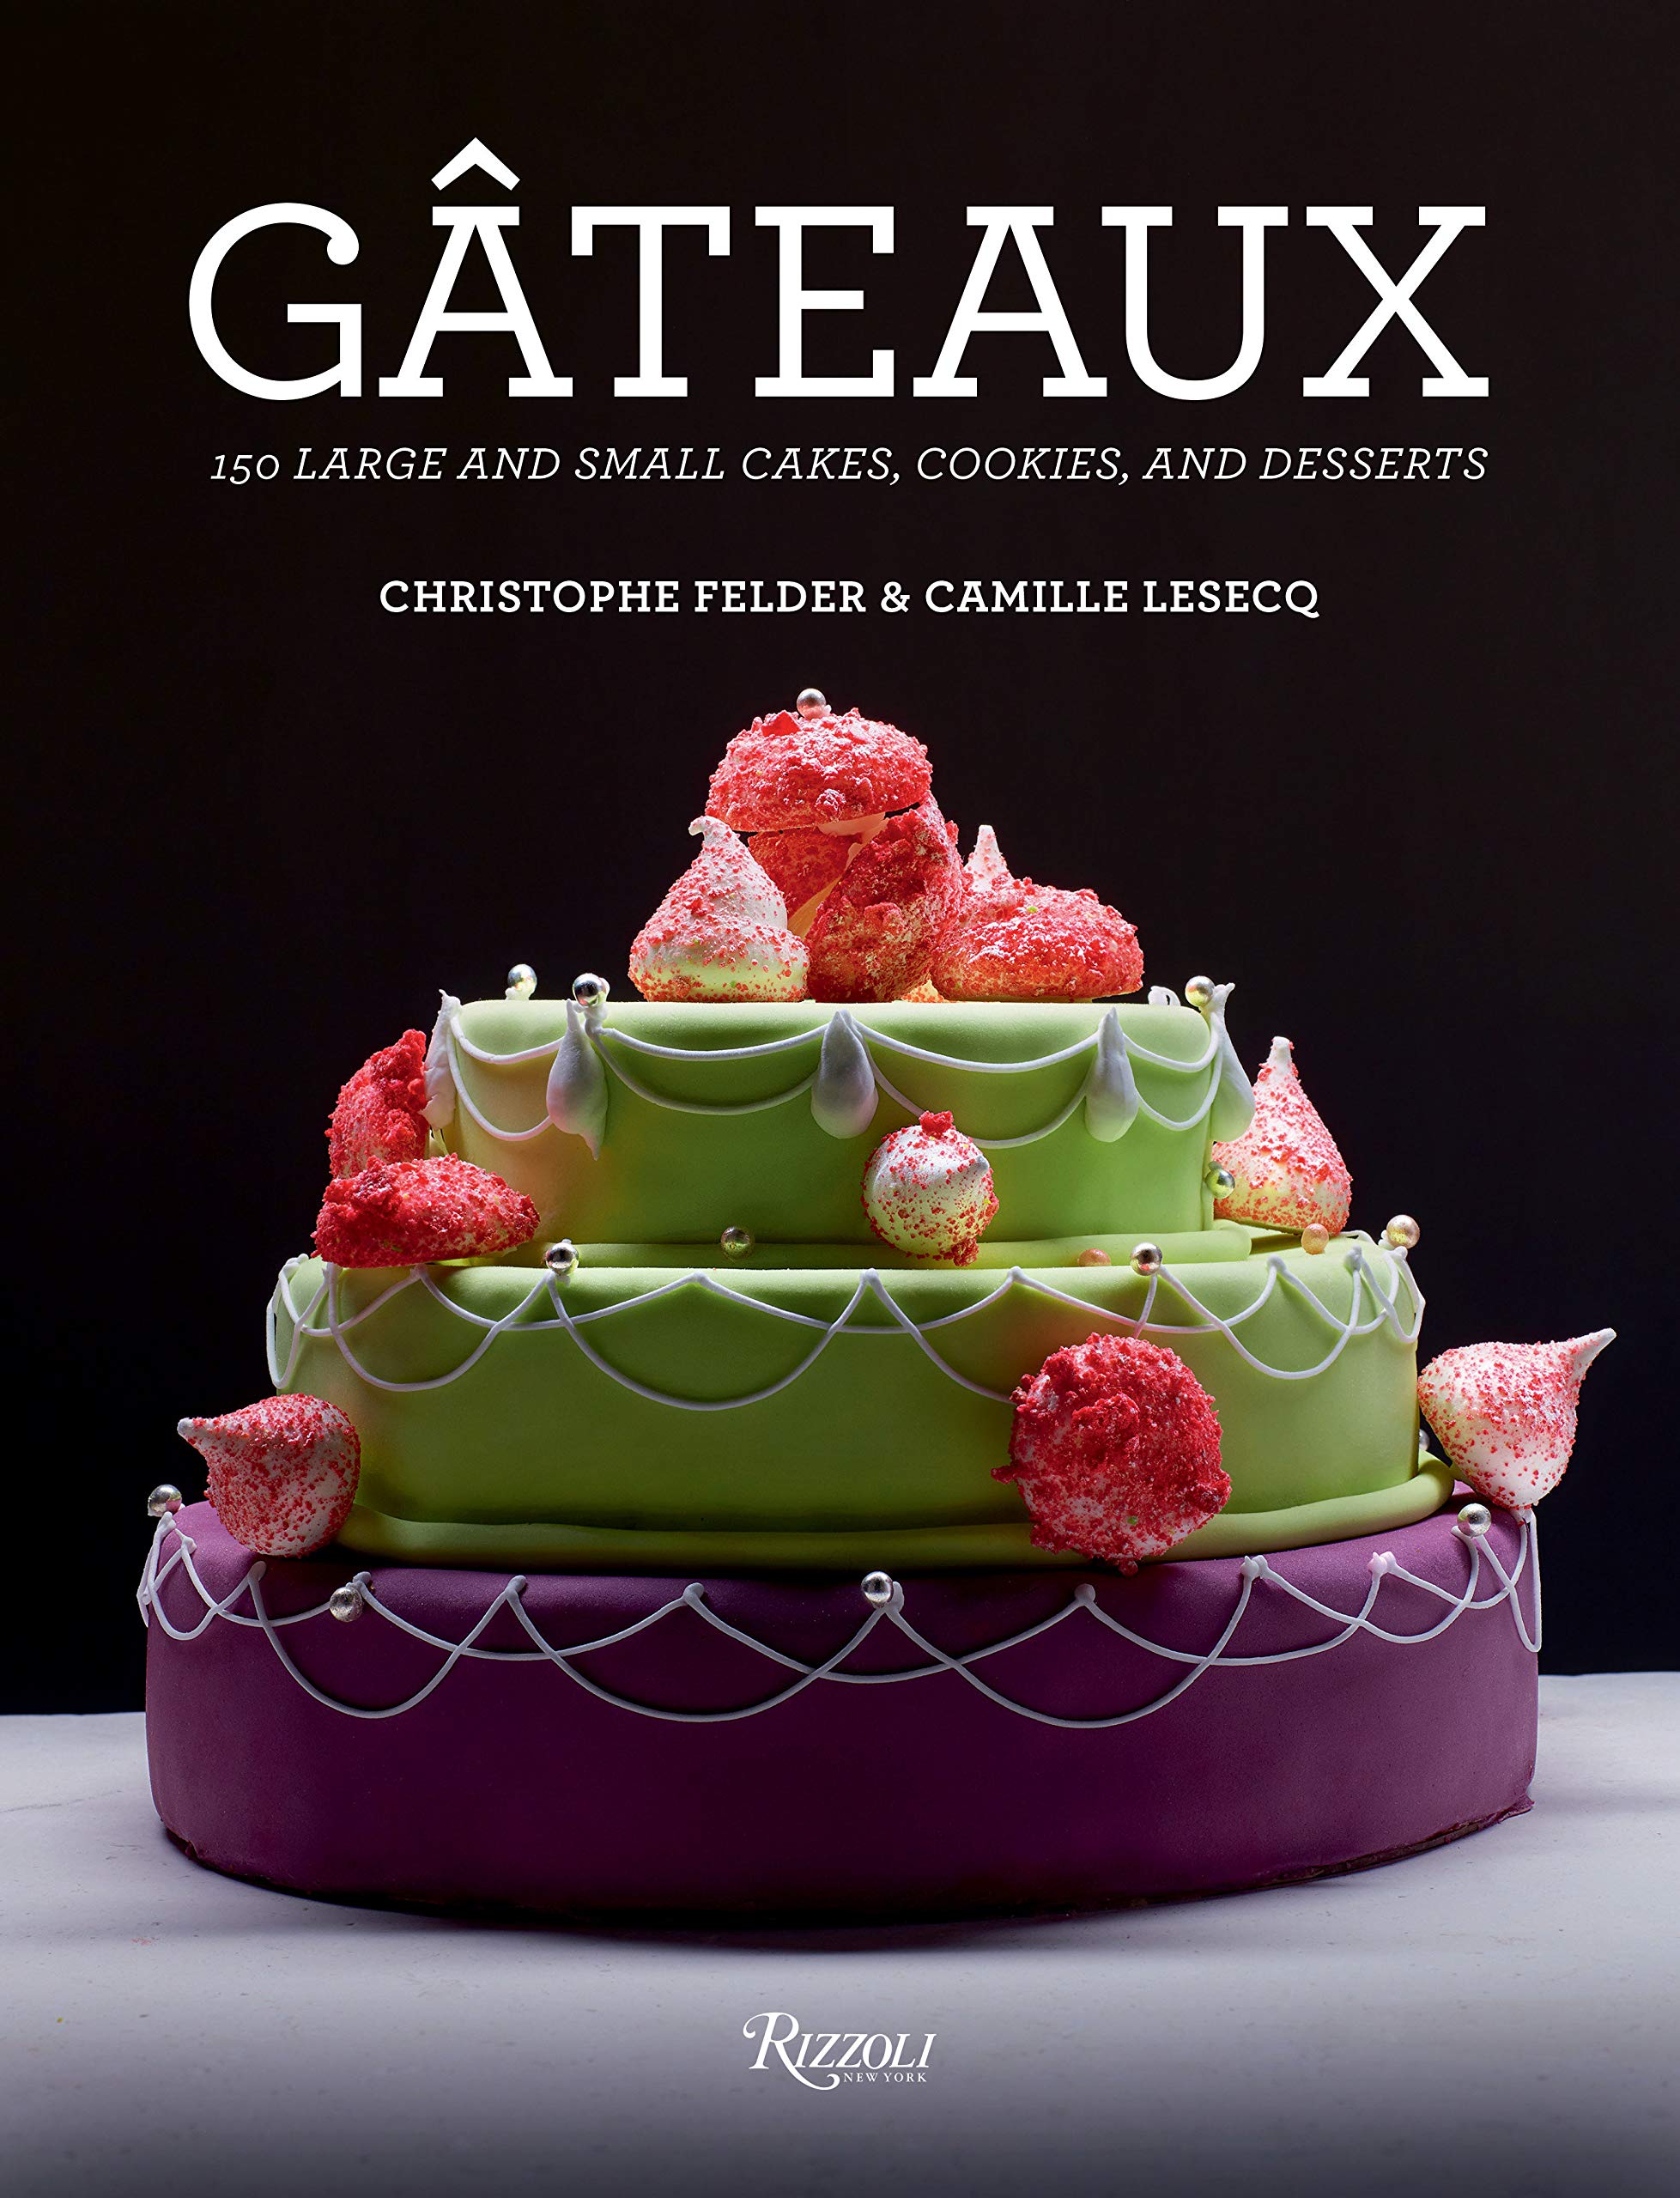 Gateaux: 150 Large and Small Cakes, Cookies, and Desserts (Christophe Felder, Camille Lesecq)